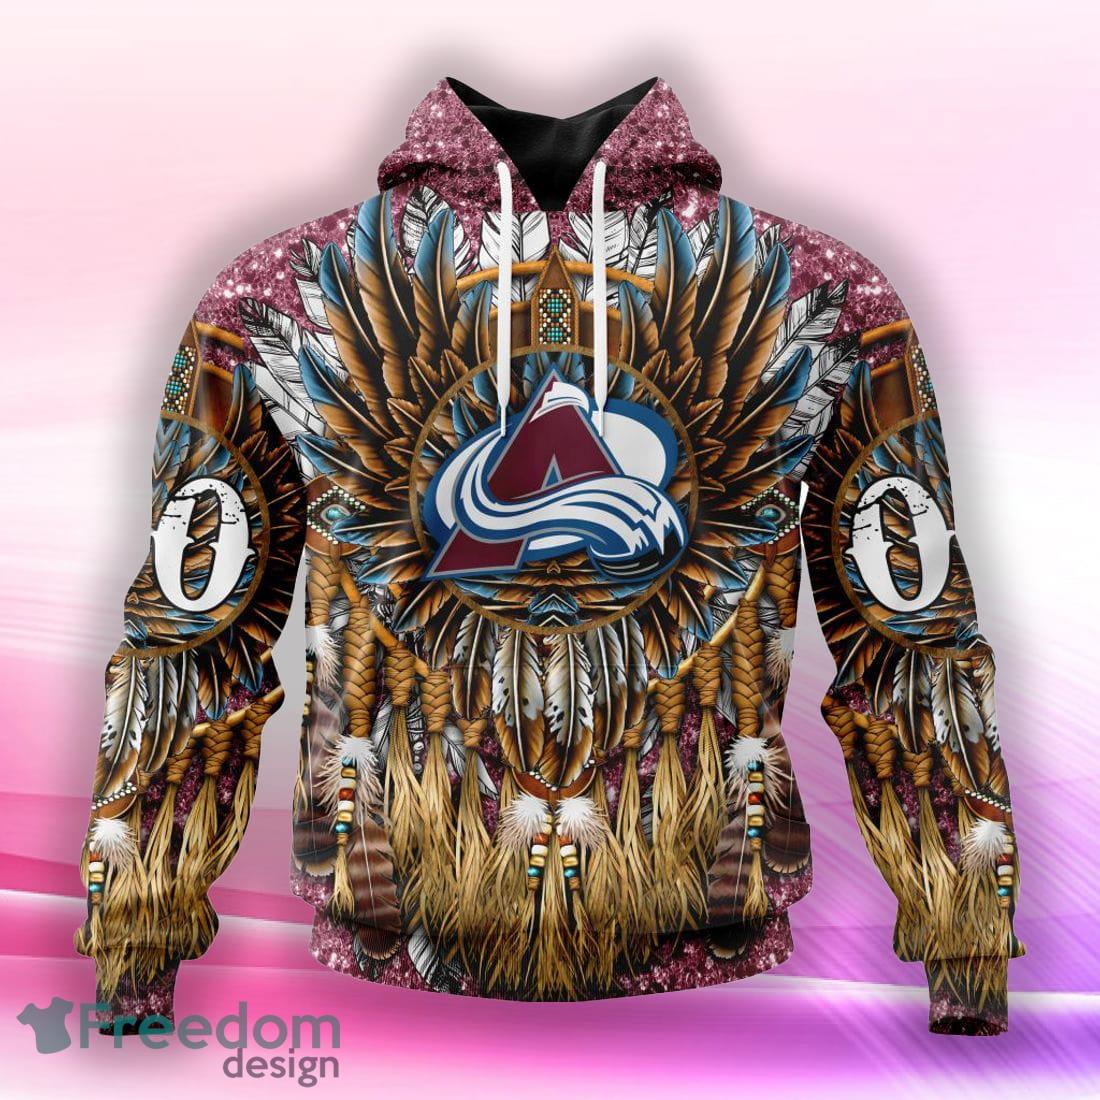 Colorado Avalanche T-shirt 3D cartoon graphic gift for fan